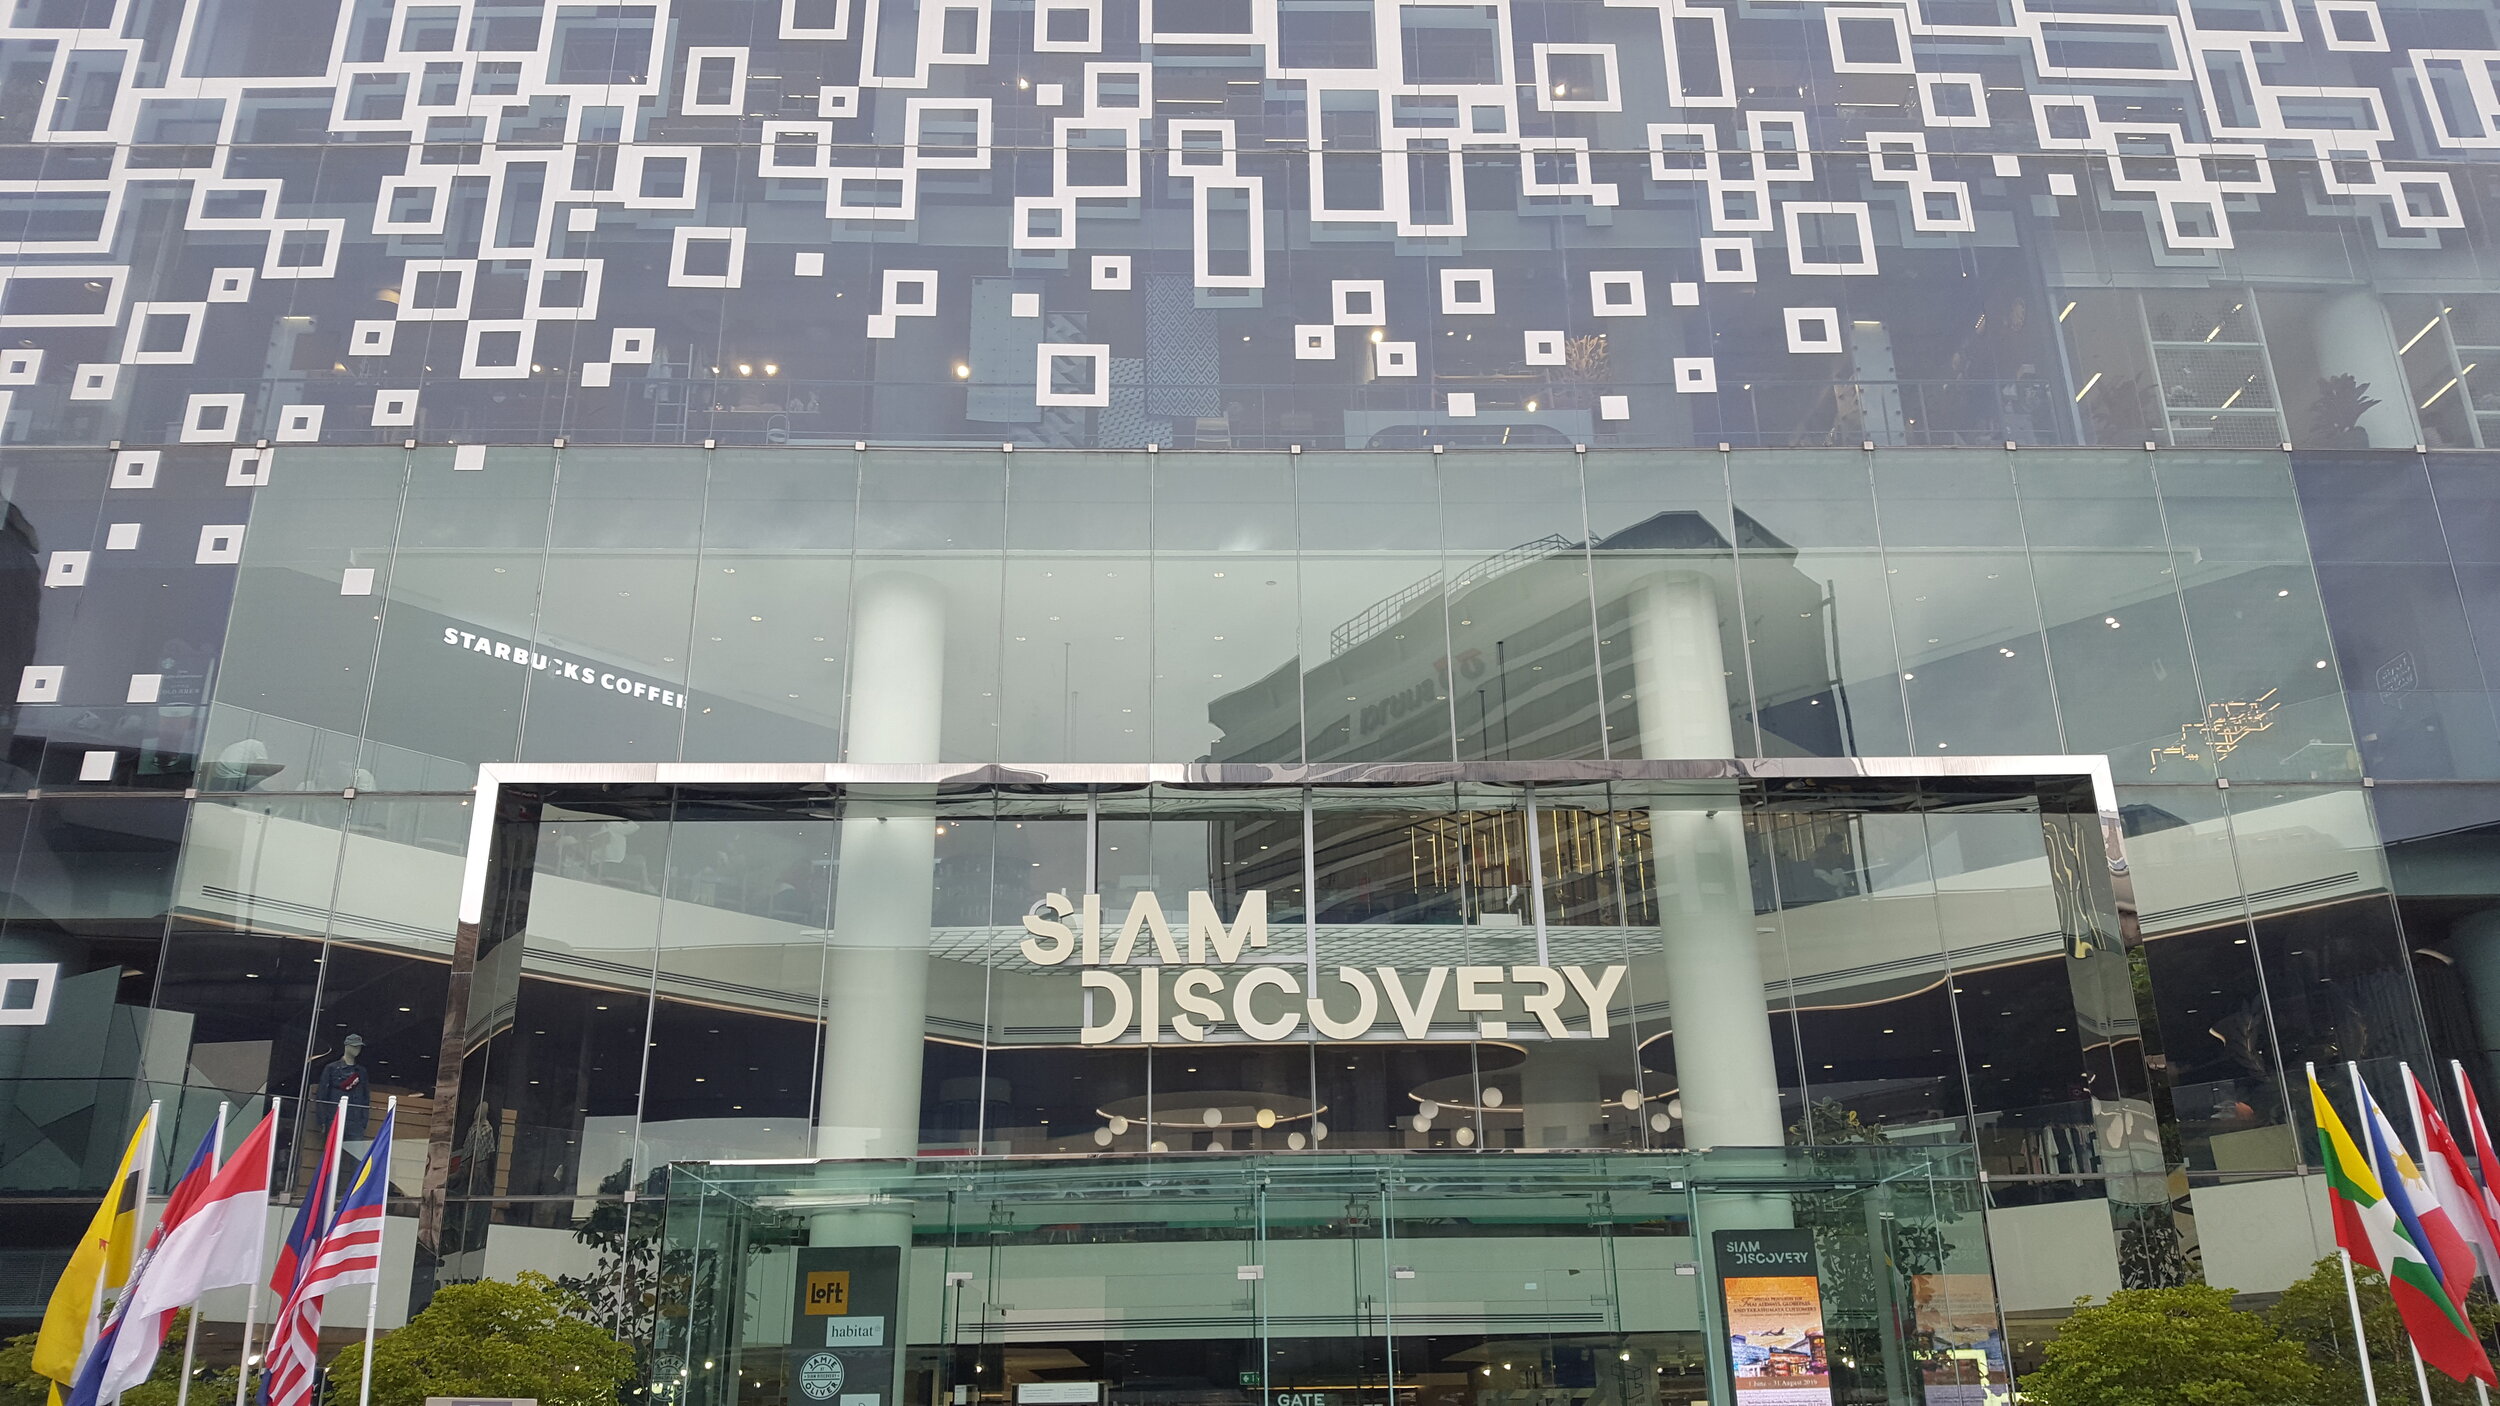 SIAM Discovery Mall - All the Western stores are in here